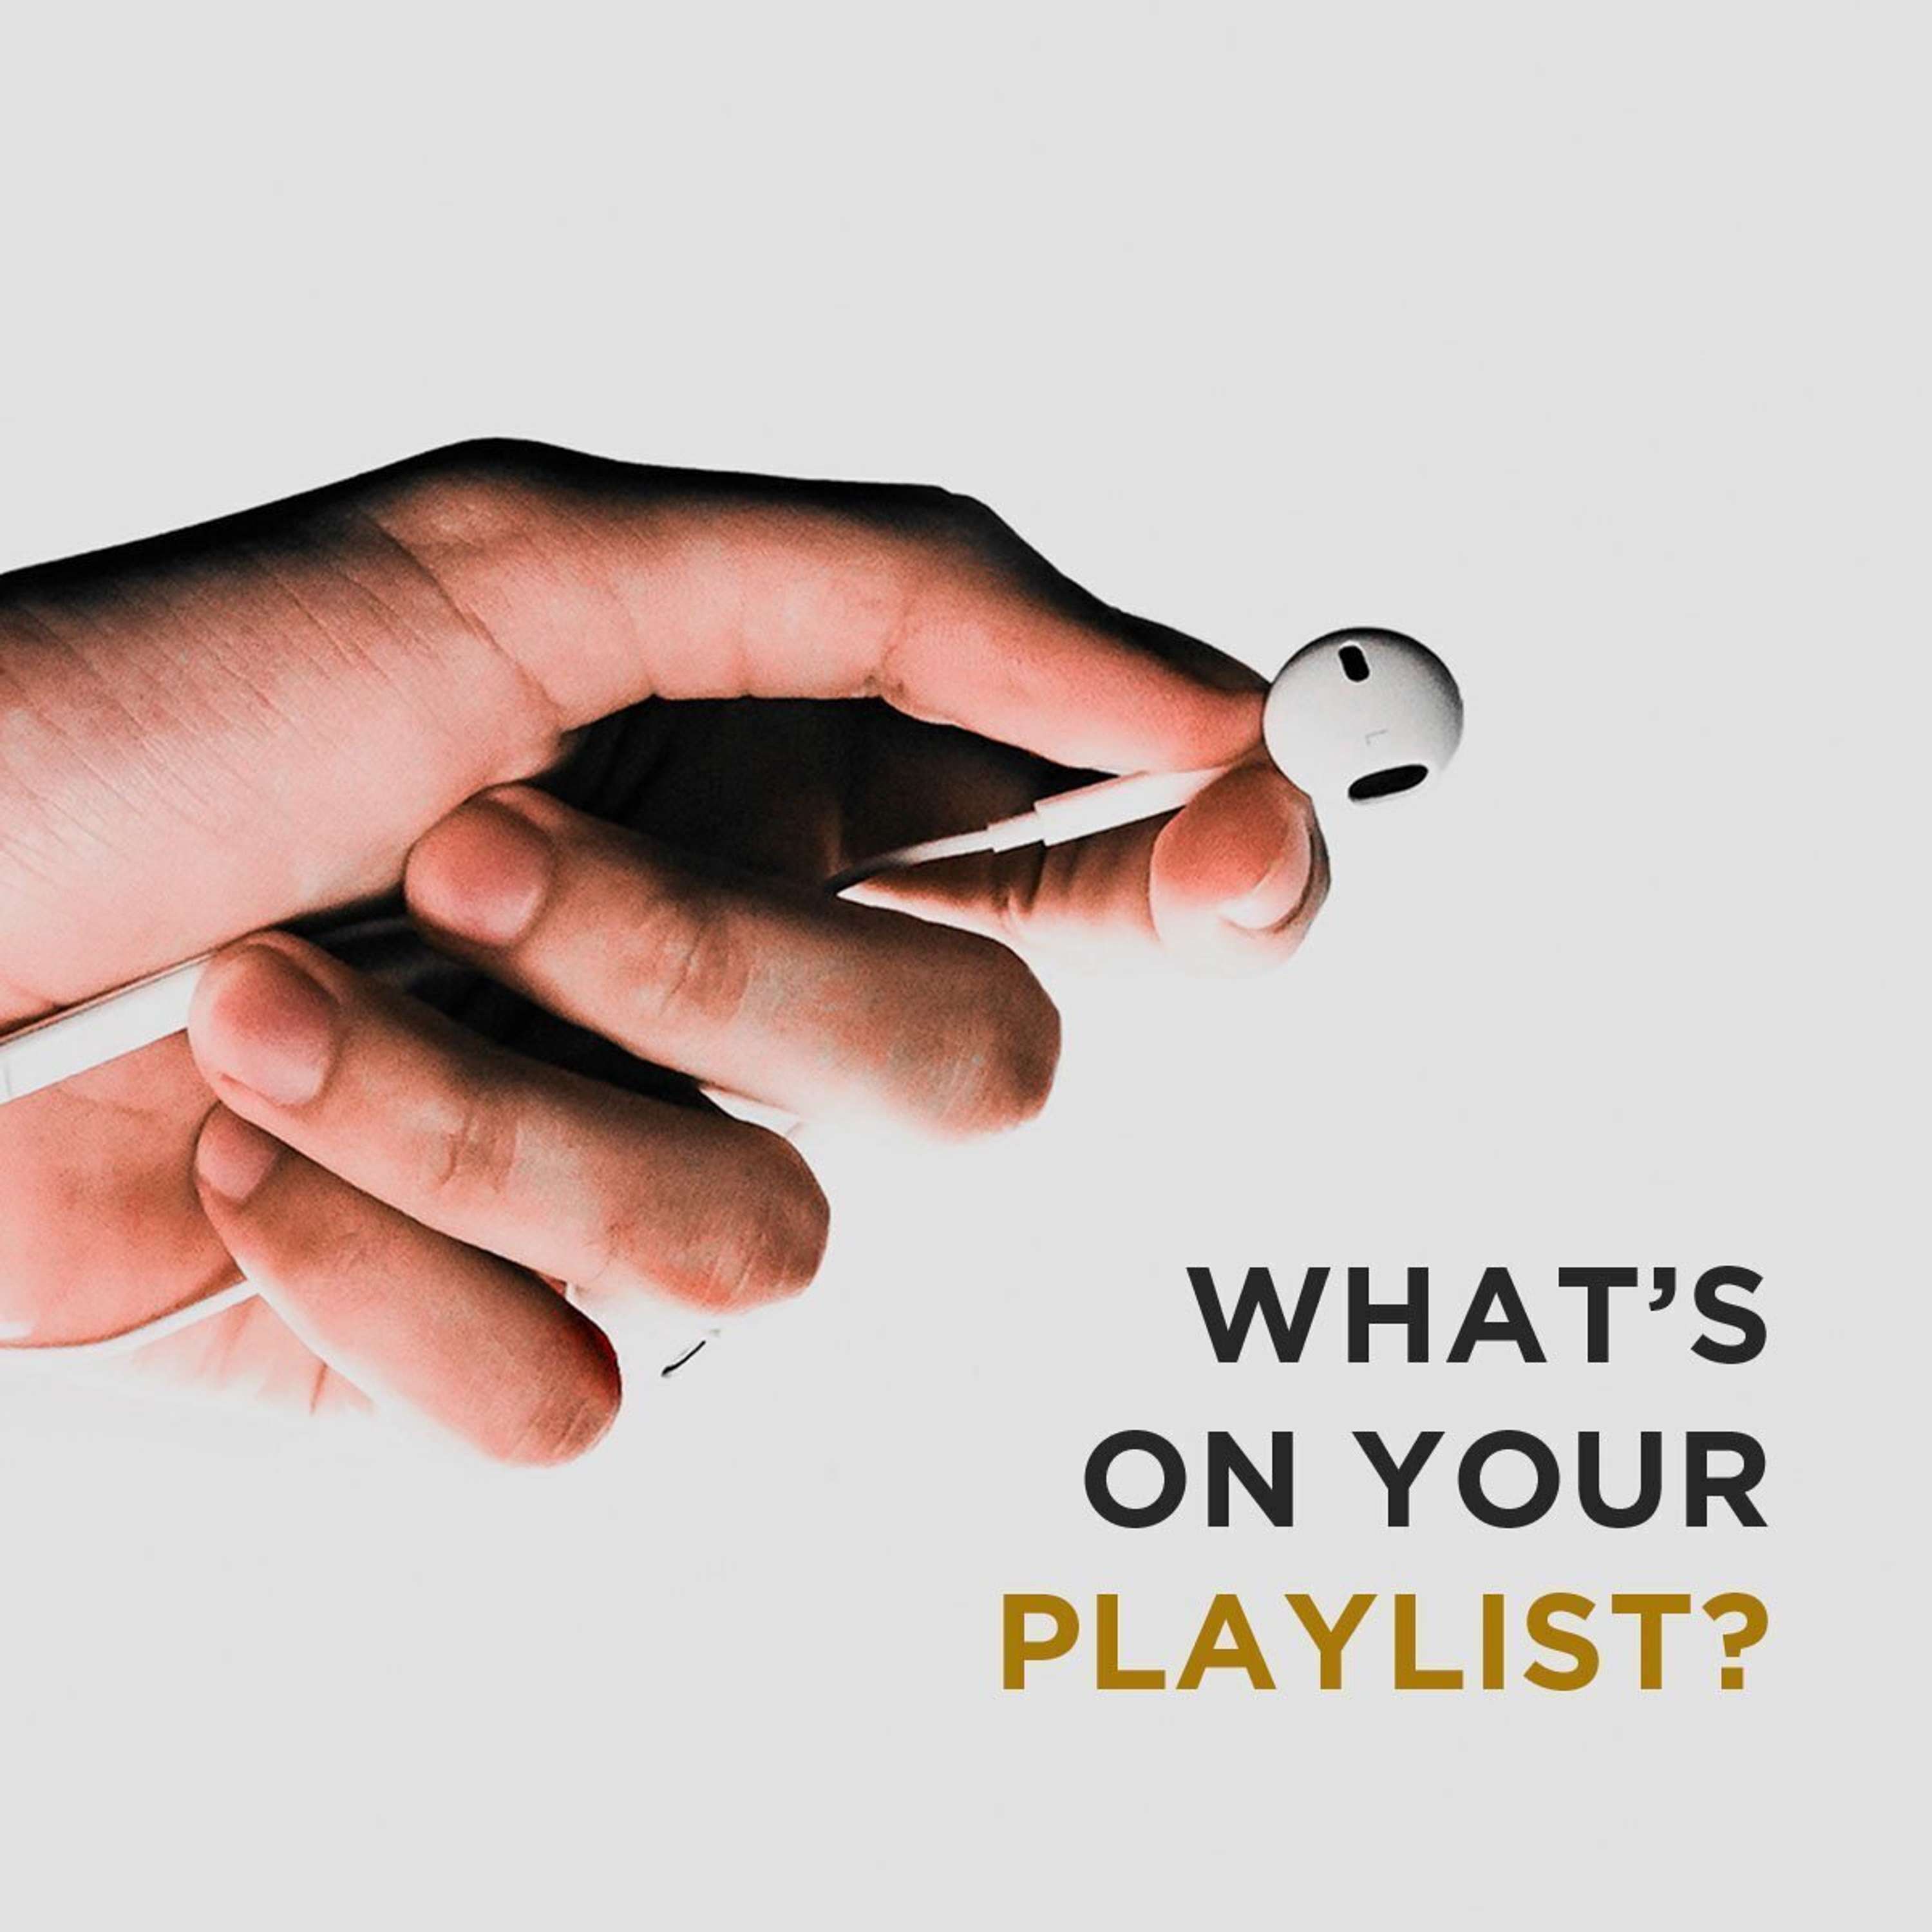 What's On Your Playlist?